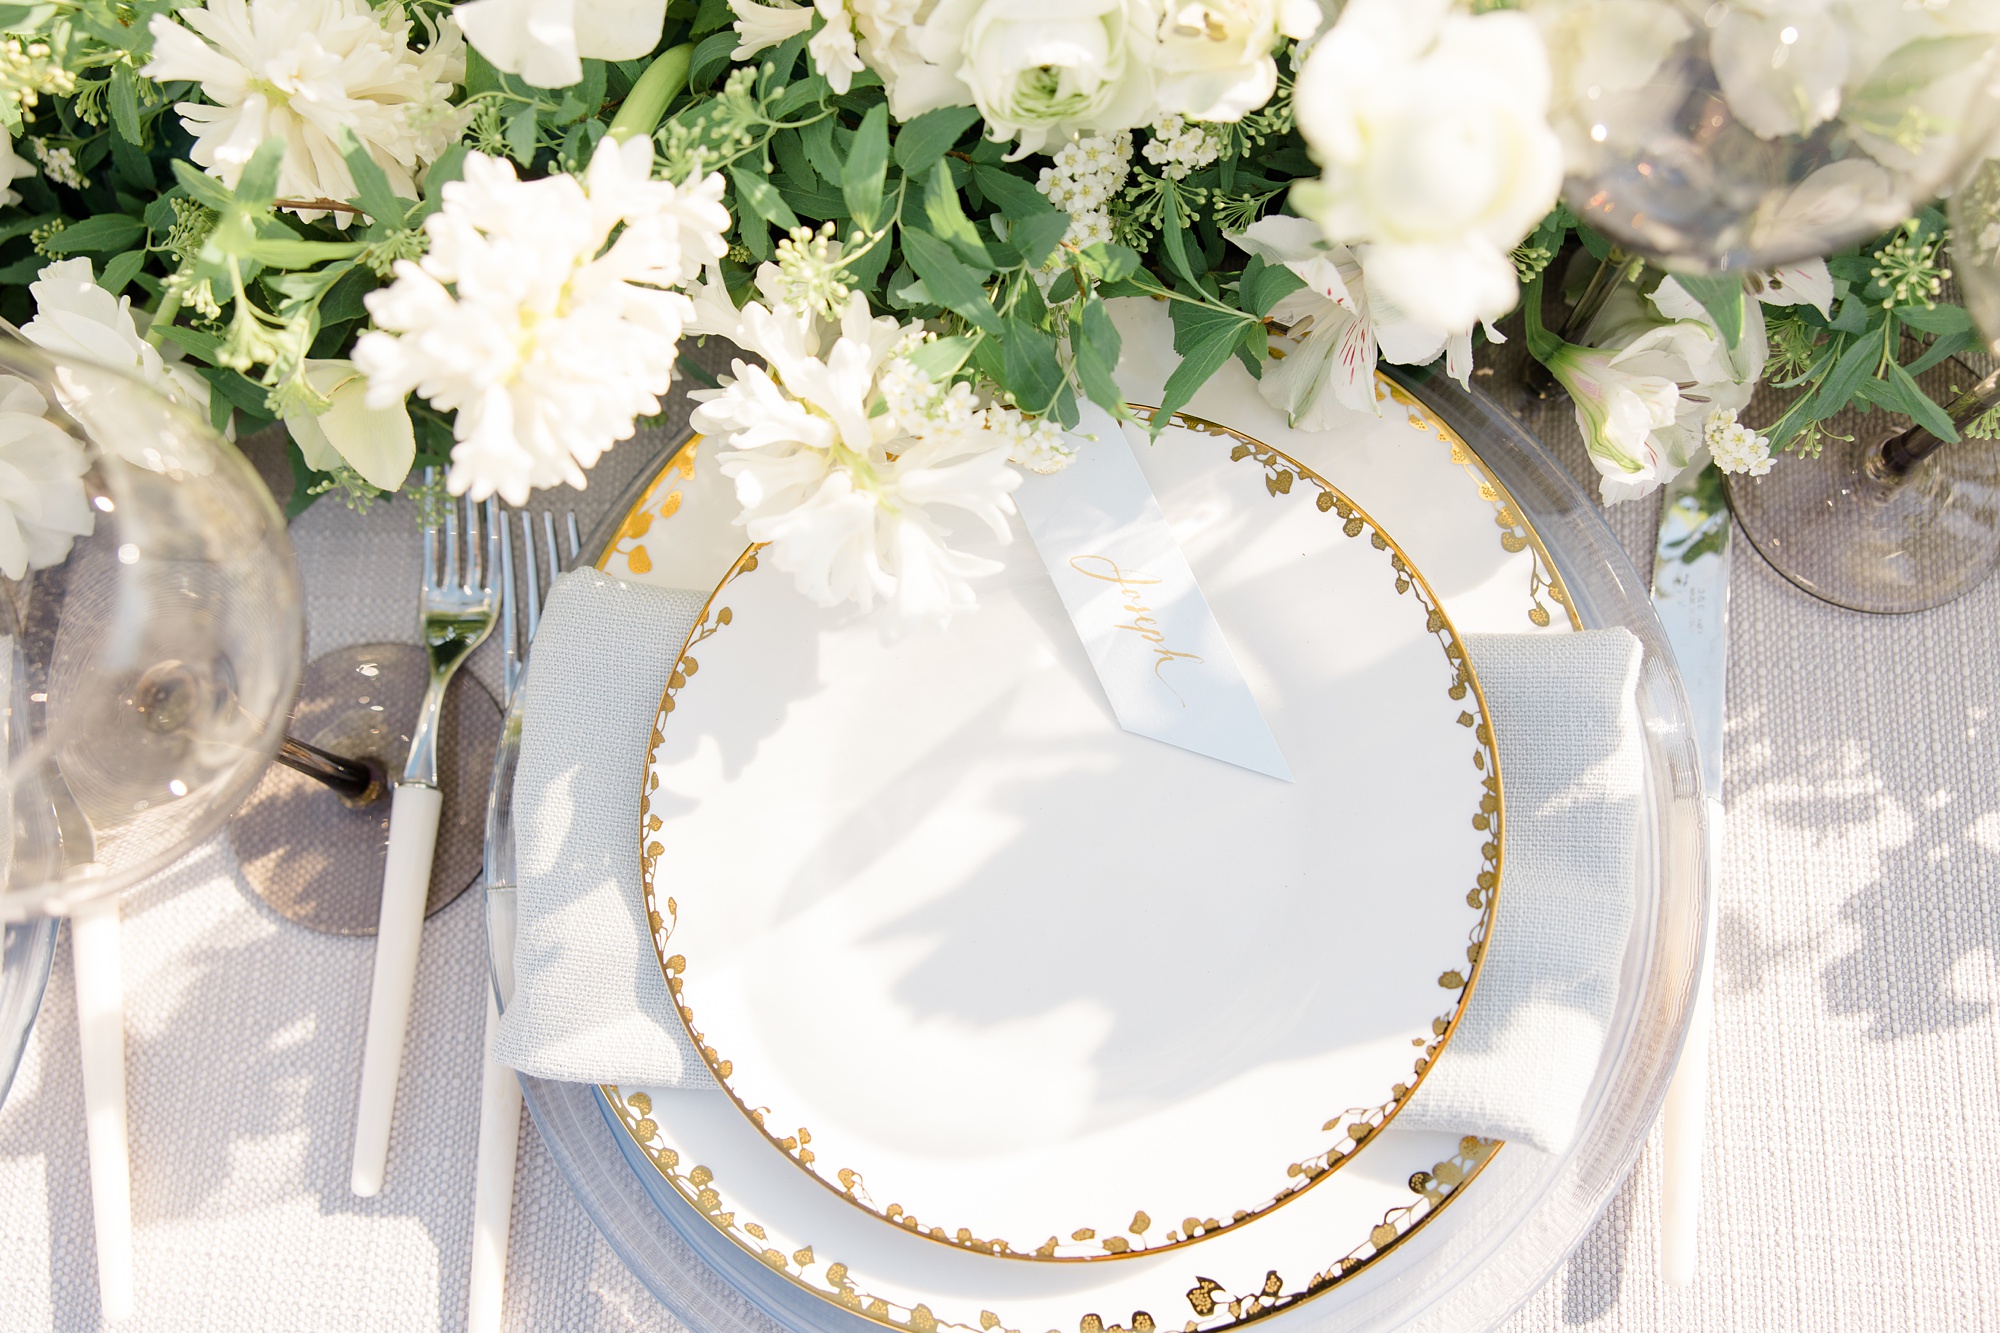 white plates with gold rim for wedding reception on Folly Beach